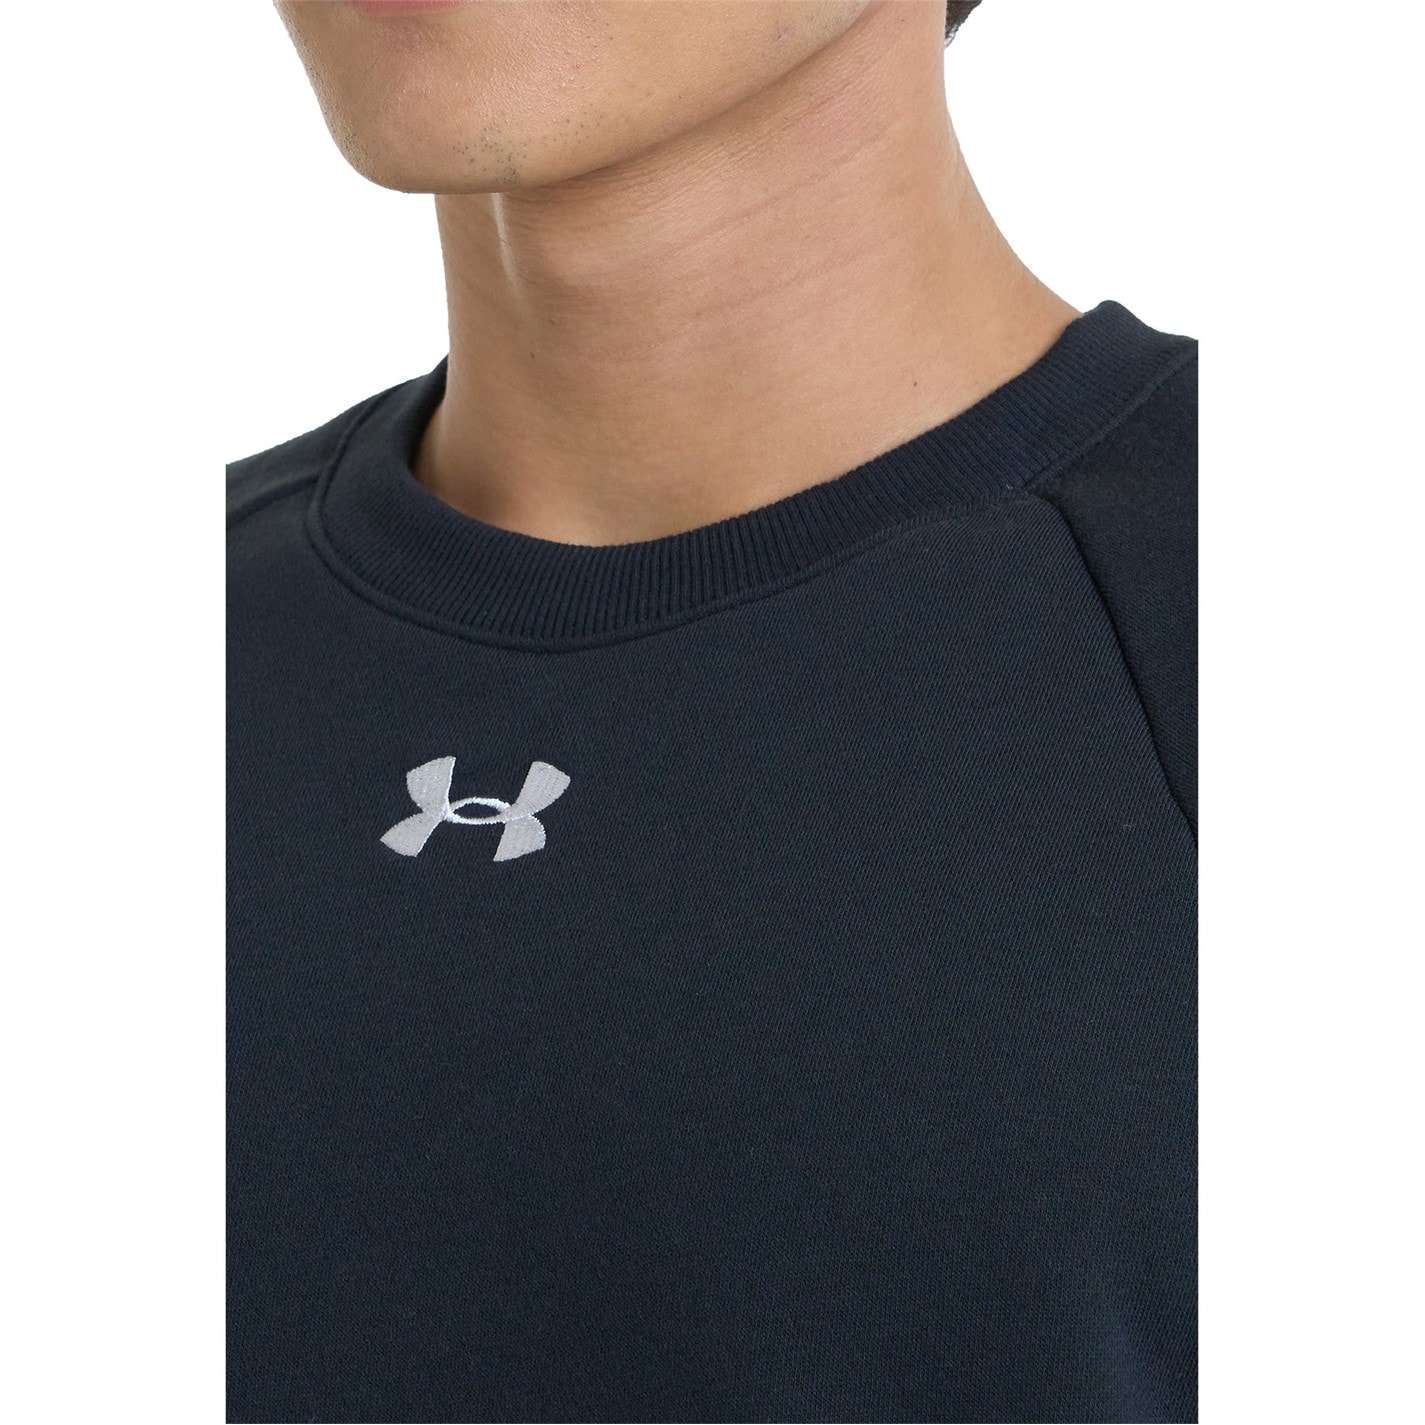 Bluza trening Under Armour Rival Fitted Crew barbat